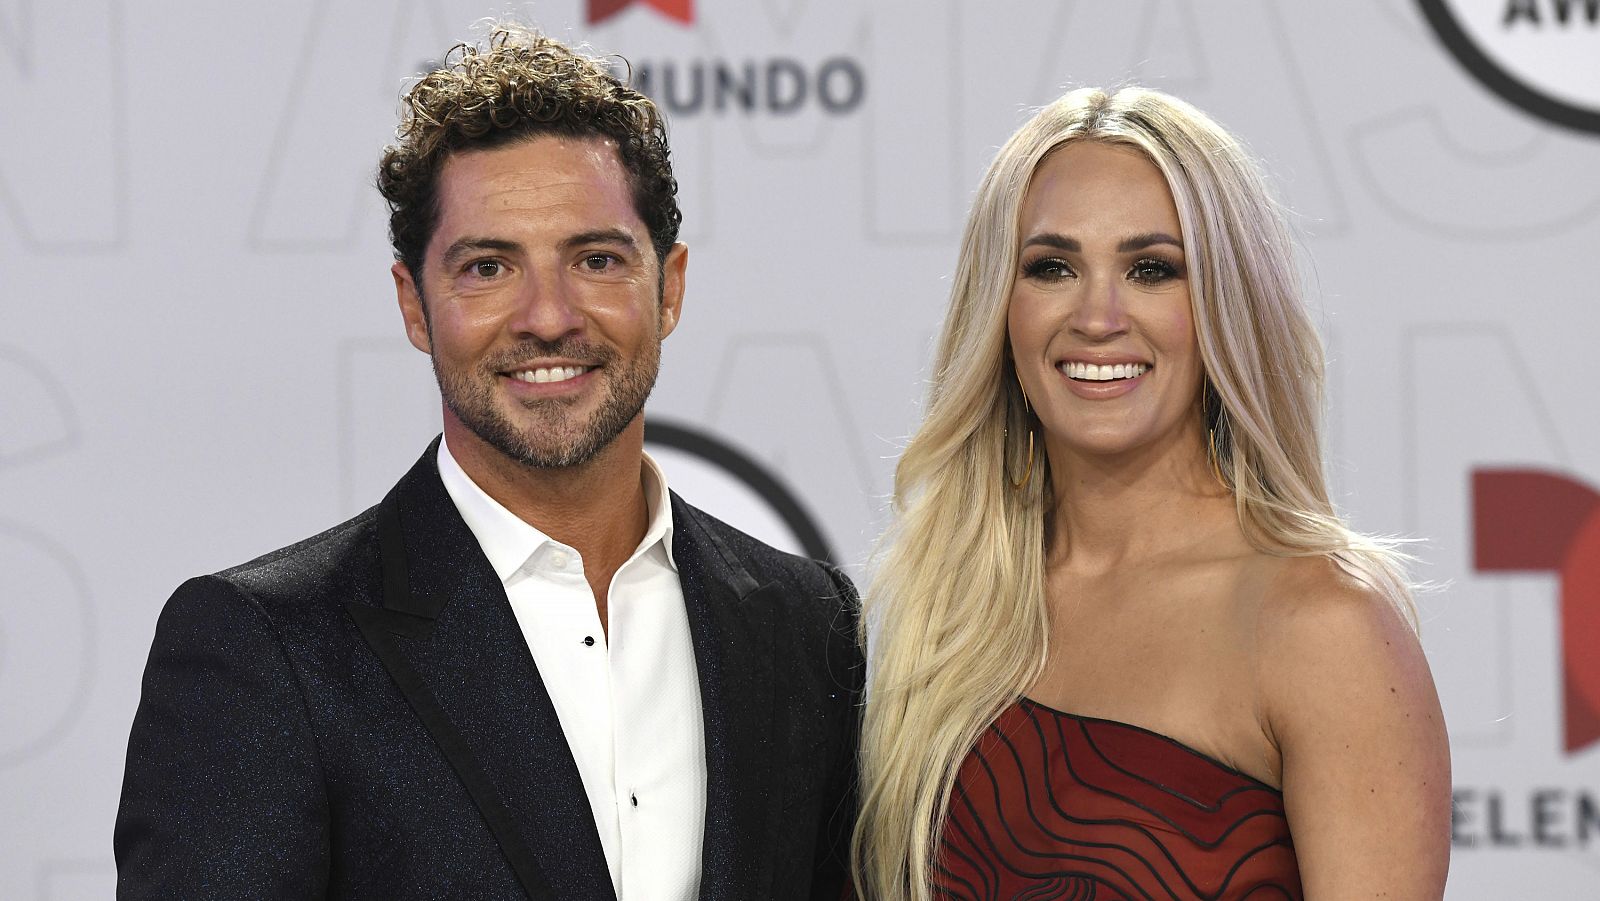 Bisbal acude con Carrie Underwood a los Latin American Music Awards